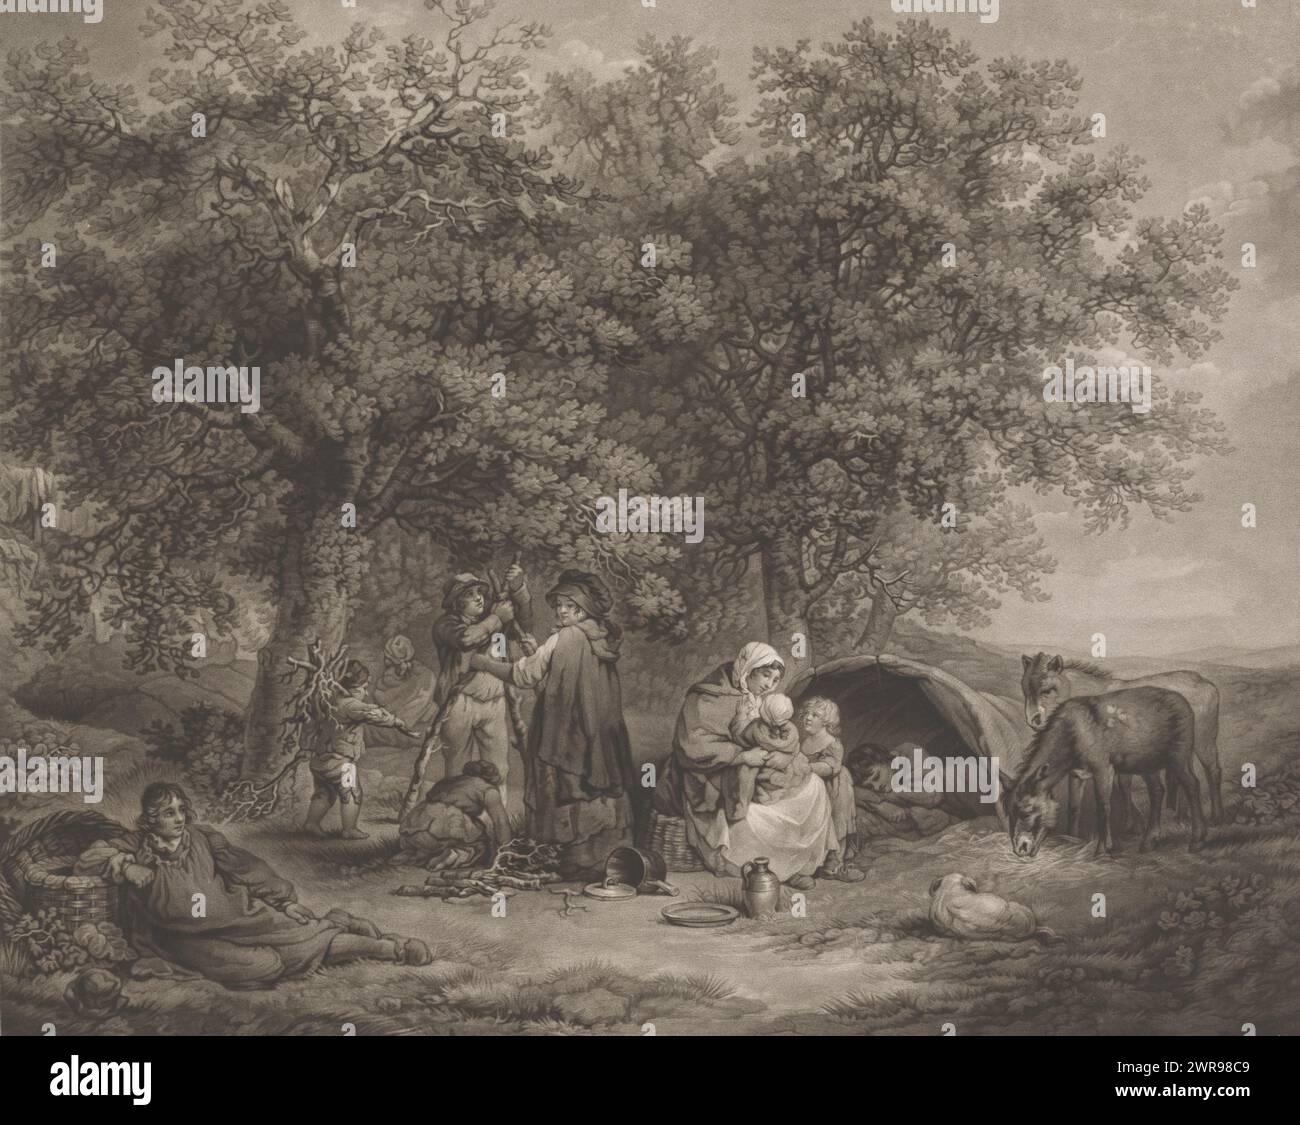 Group of people at a tent making a campfire, The Gipsies Tent (title on object), print maker: Joseph Grozer, after painting by: George Morland, publisher: Benjamin Beale Evans, London, 1793, paper, height 510 mm × width 600 mm, print Stock Photo